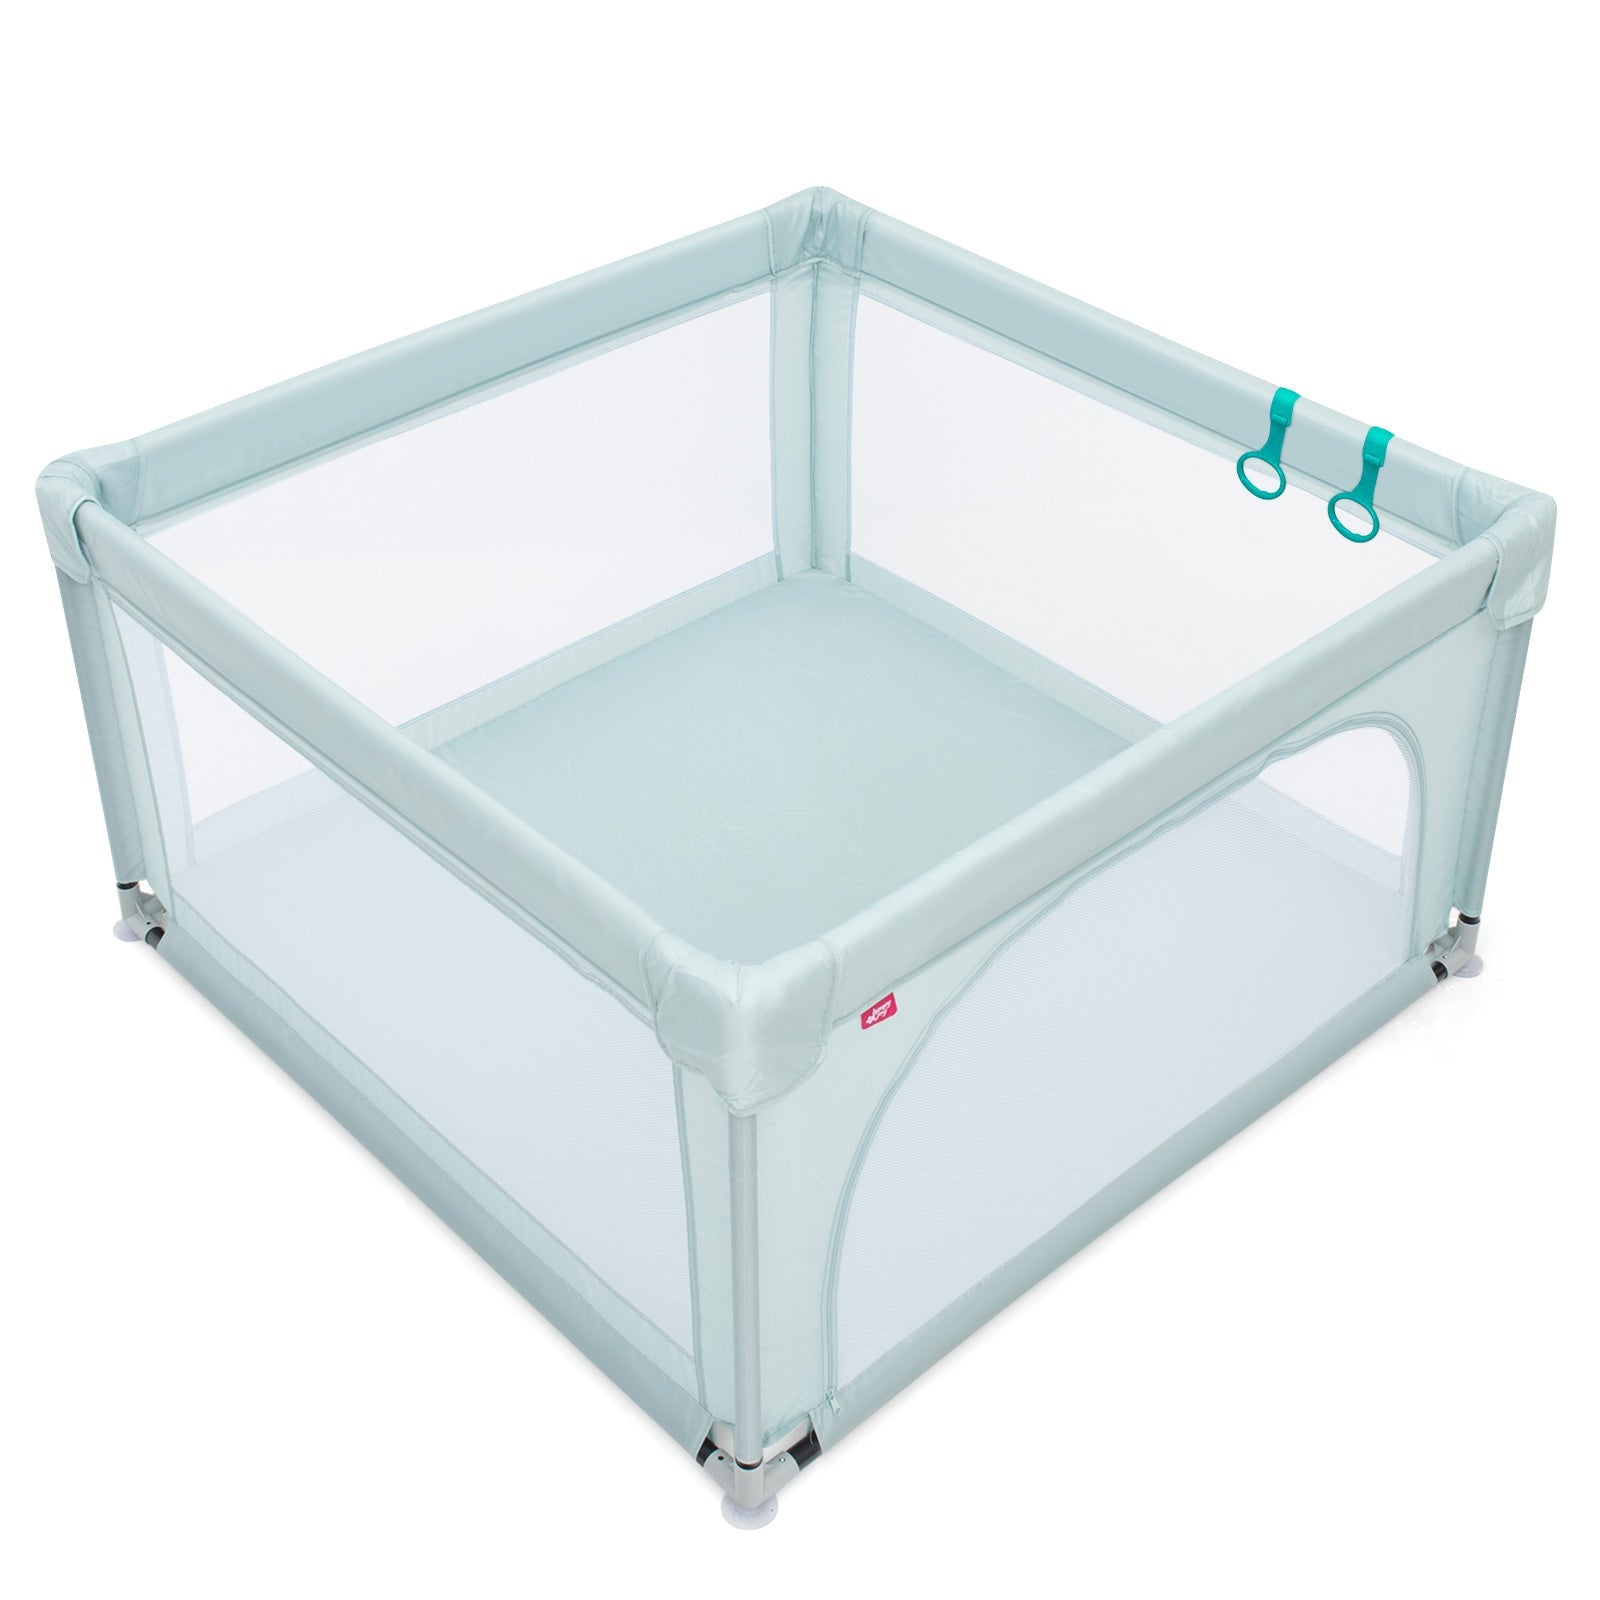 Entertain Your Baby with Blue Playpen and Ocean Balls